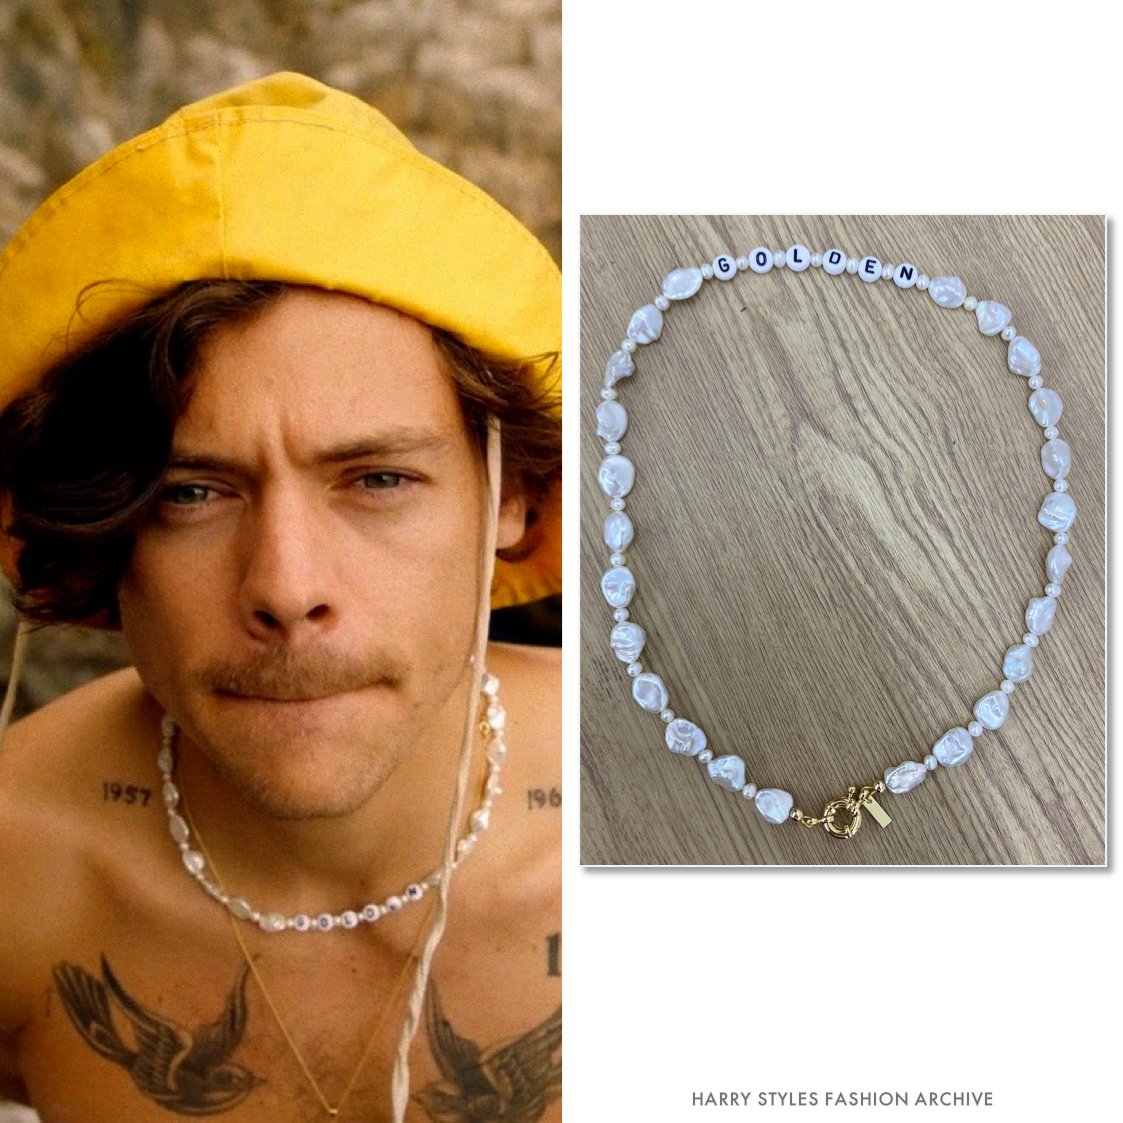 Harry Styles Fashion Archive on X: Harry wore an Eliou 'All The Feels'  pearl necklace ($165), customized with the word GOLDEN, in a Golden music  video promo shot. All of these necklaces